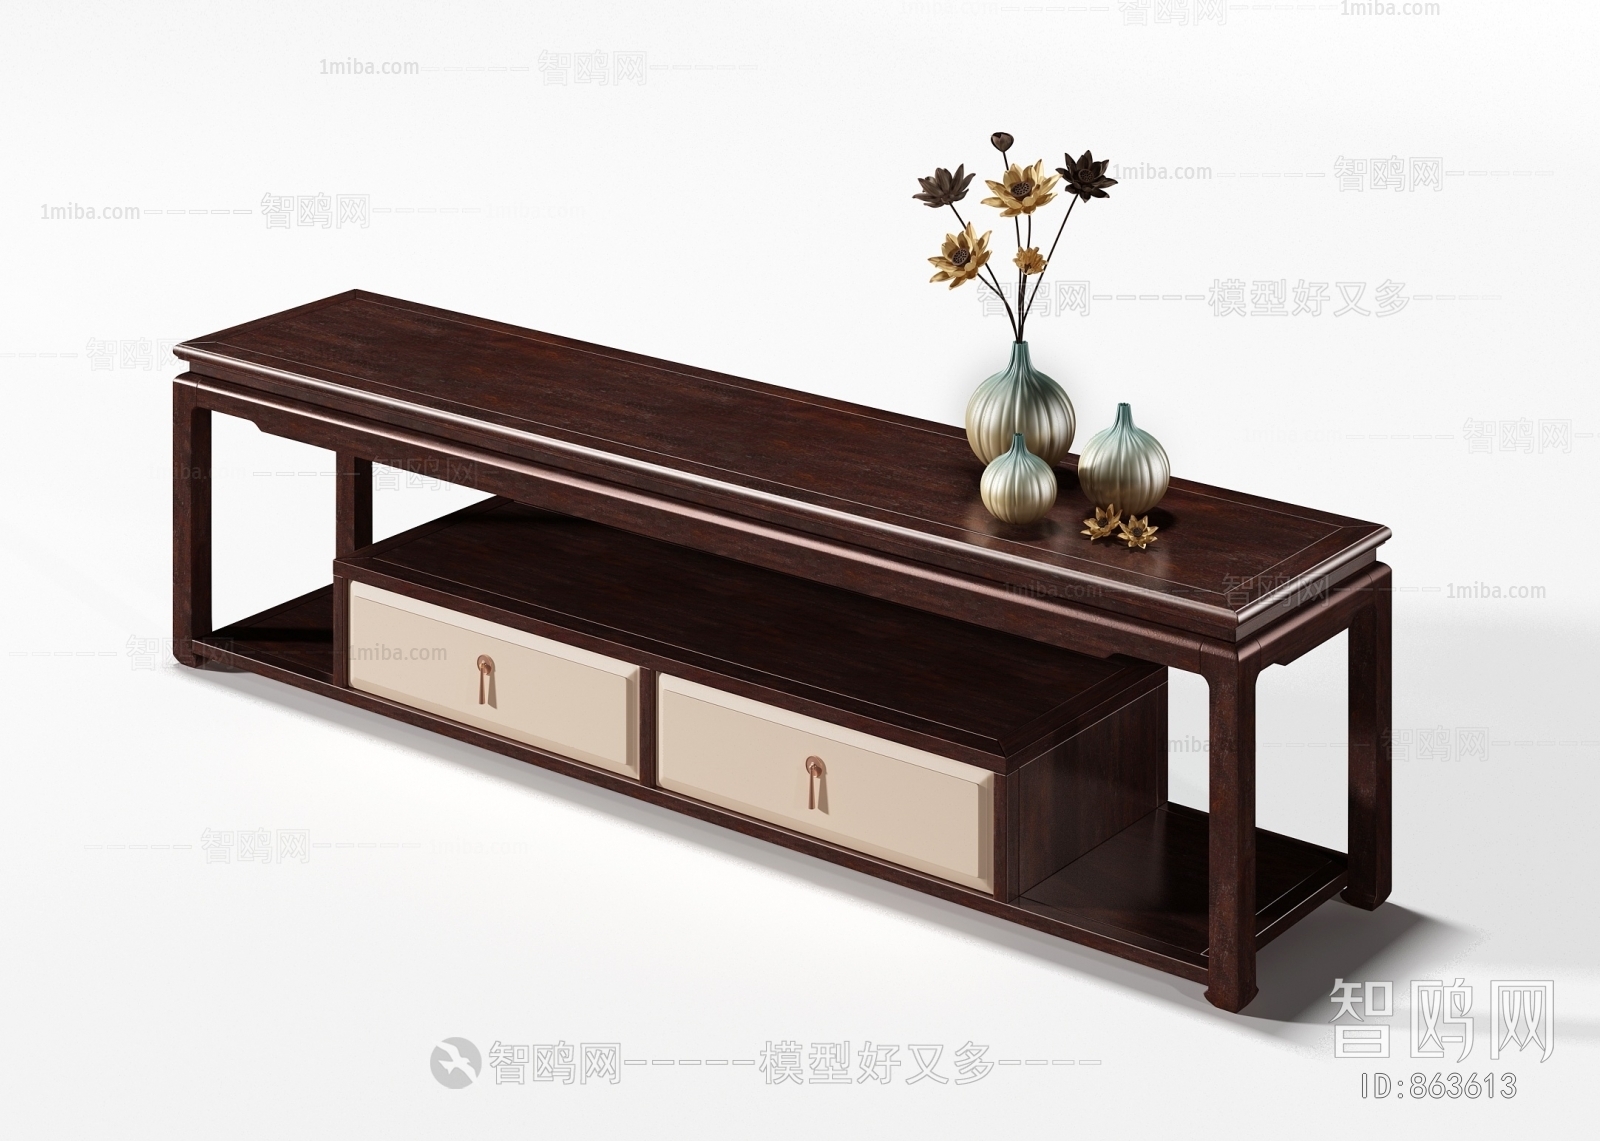 Chinese Style TV Cabinet